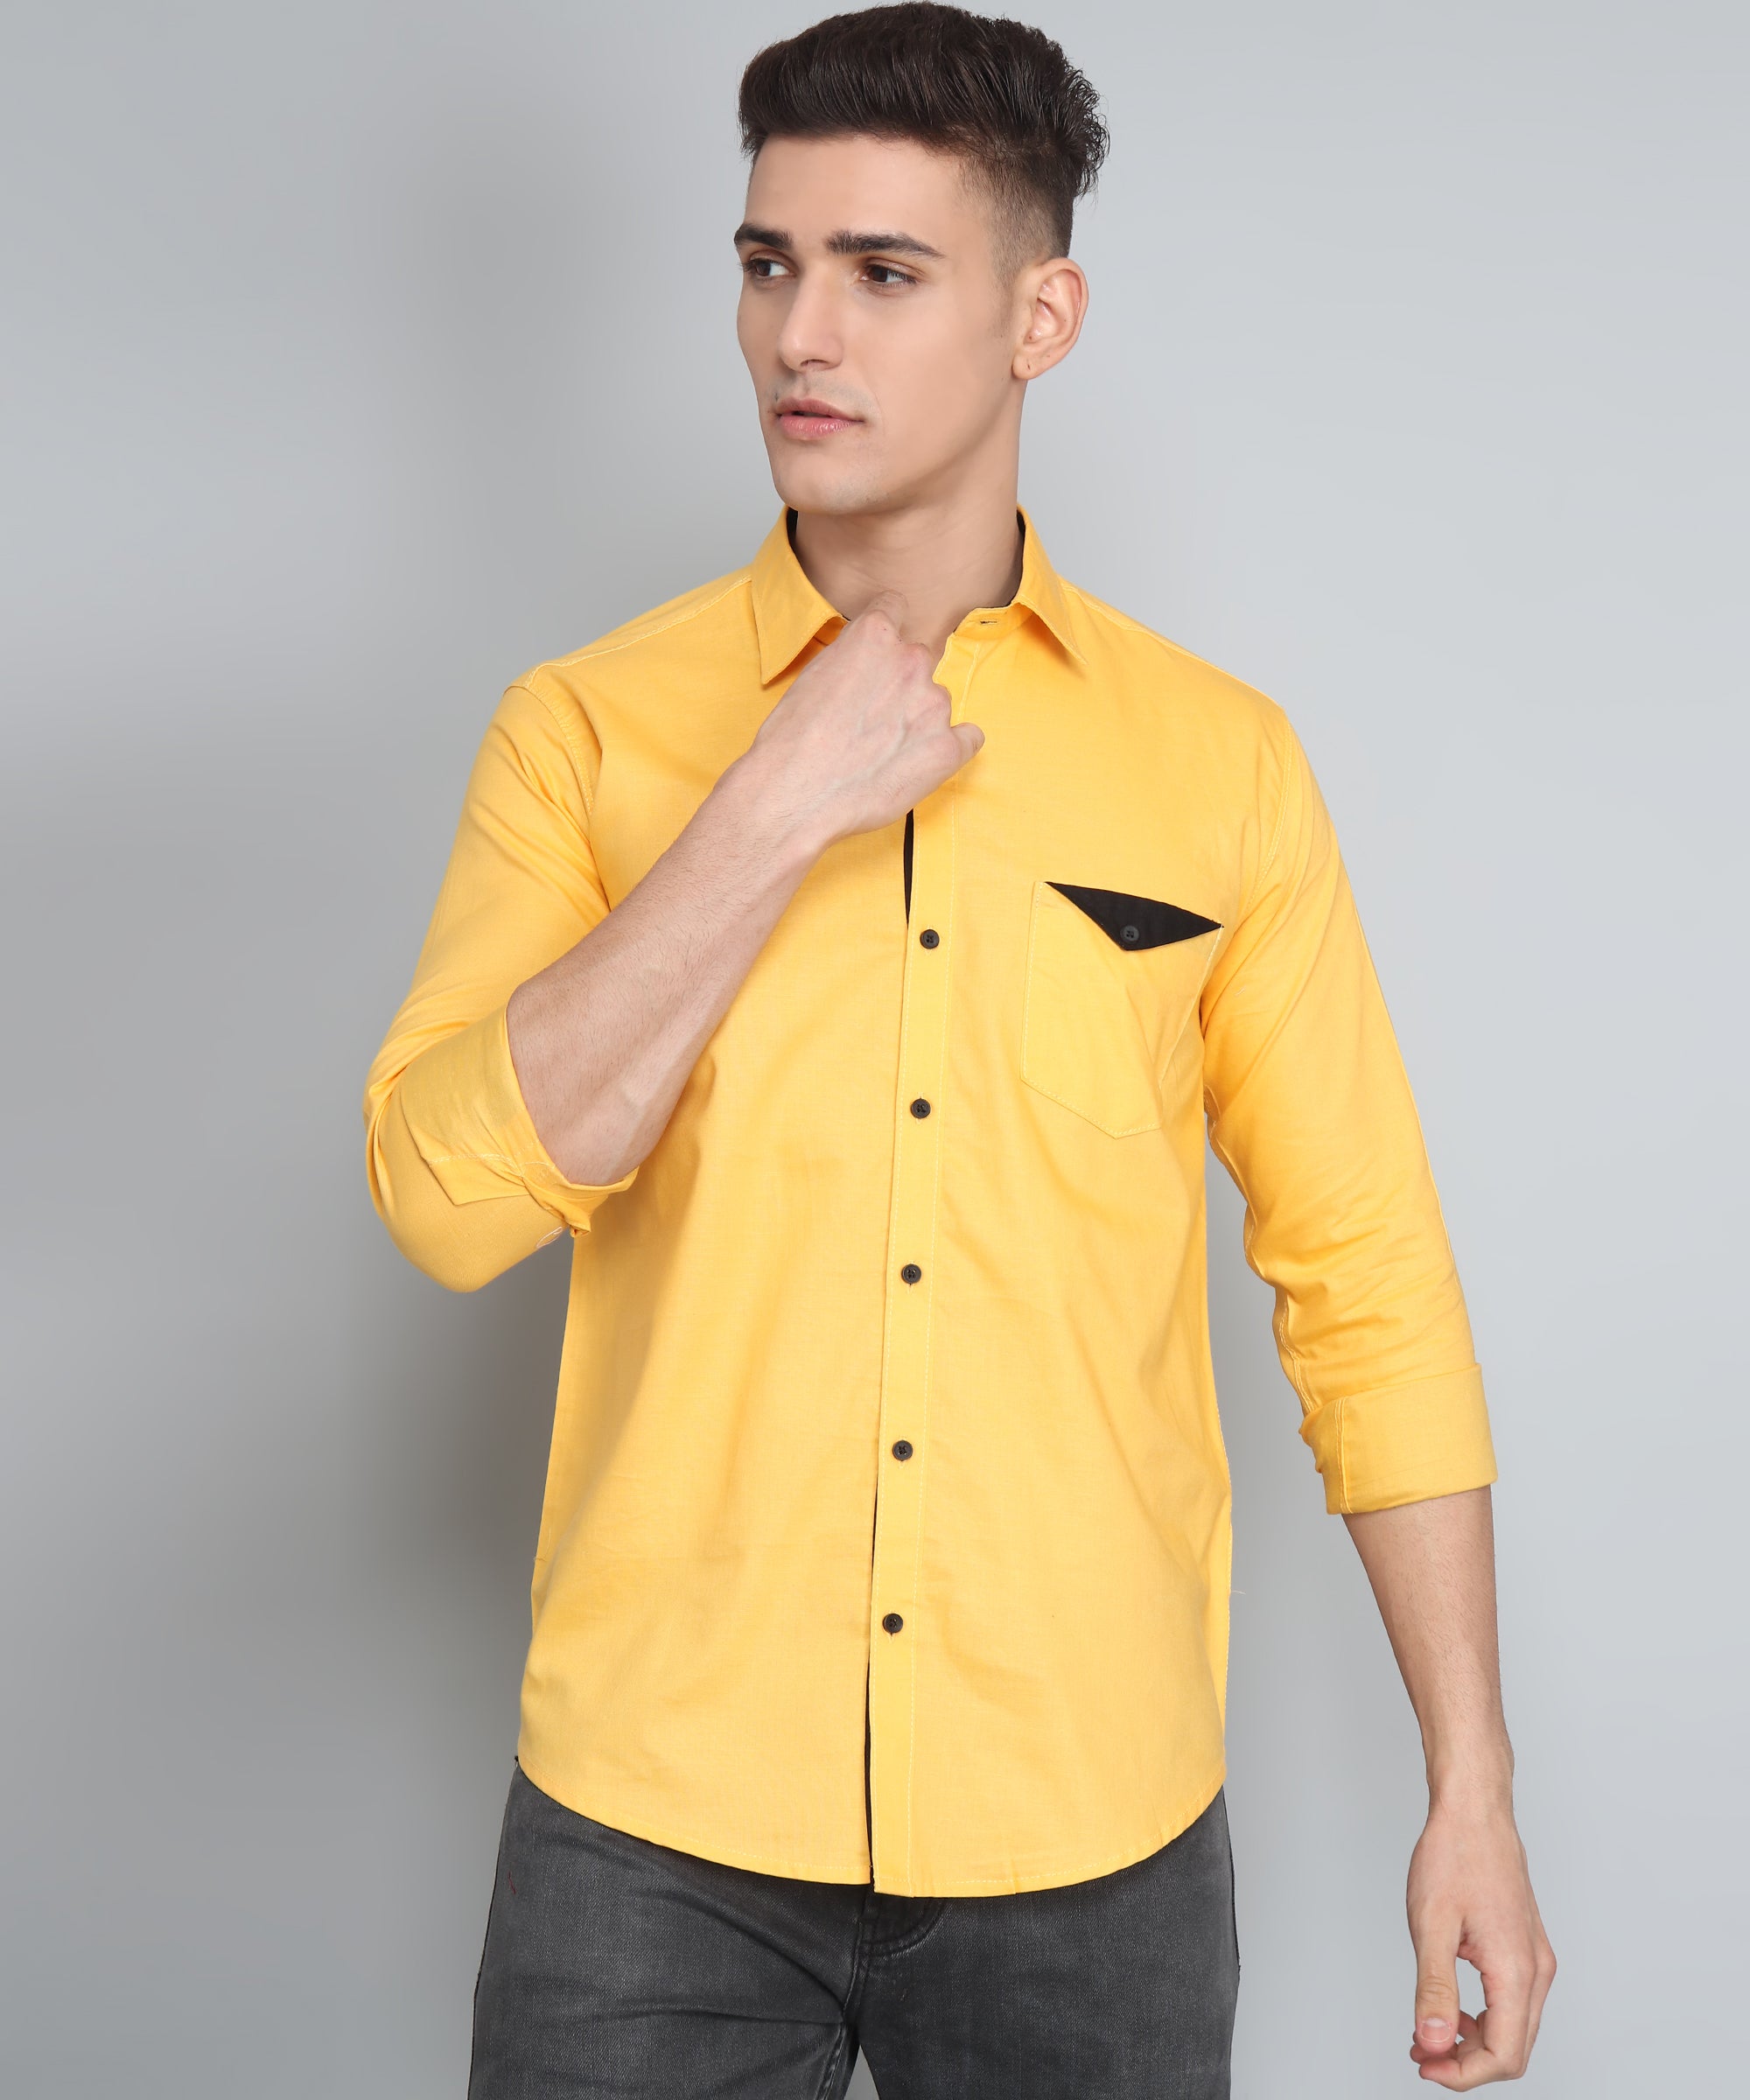 Sunny Sophistication: The Timeless Allure of the Classic Yellow Shirt